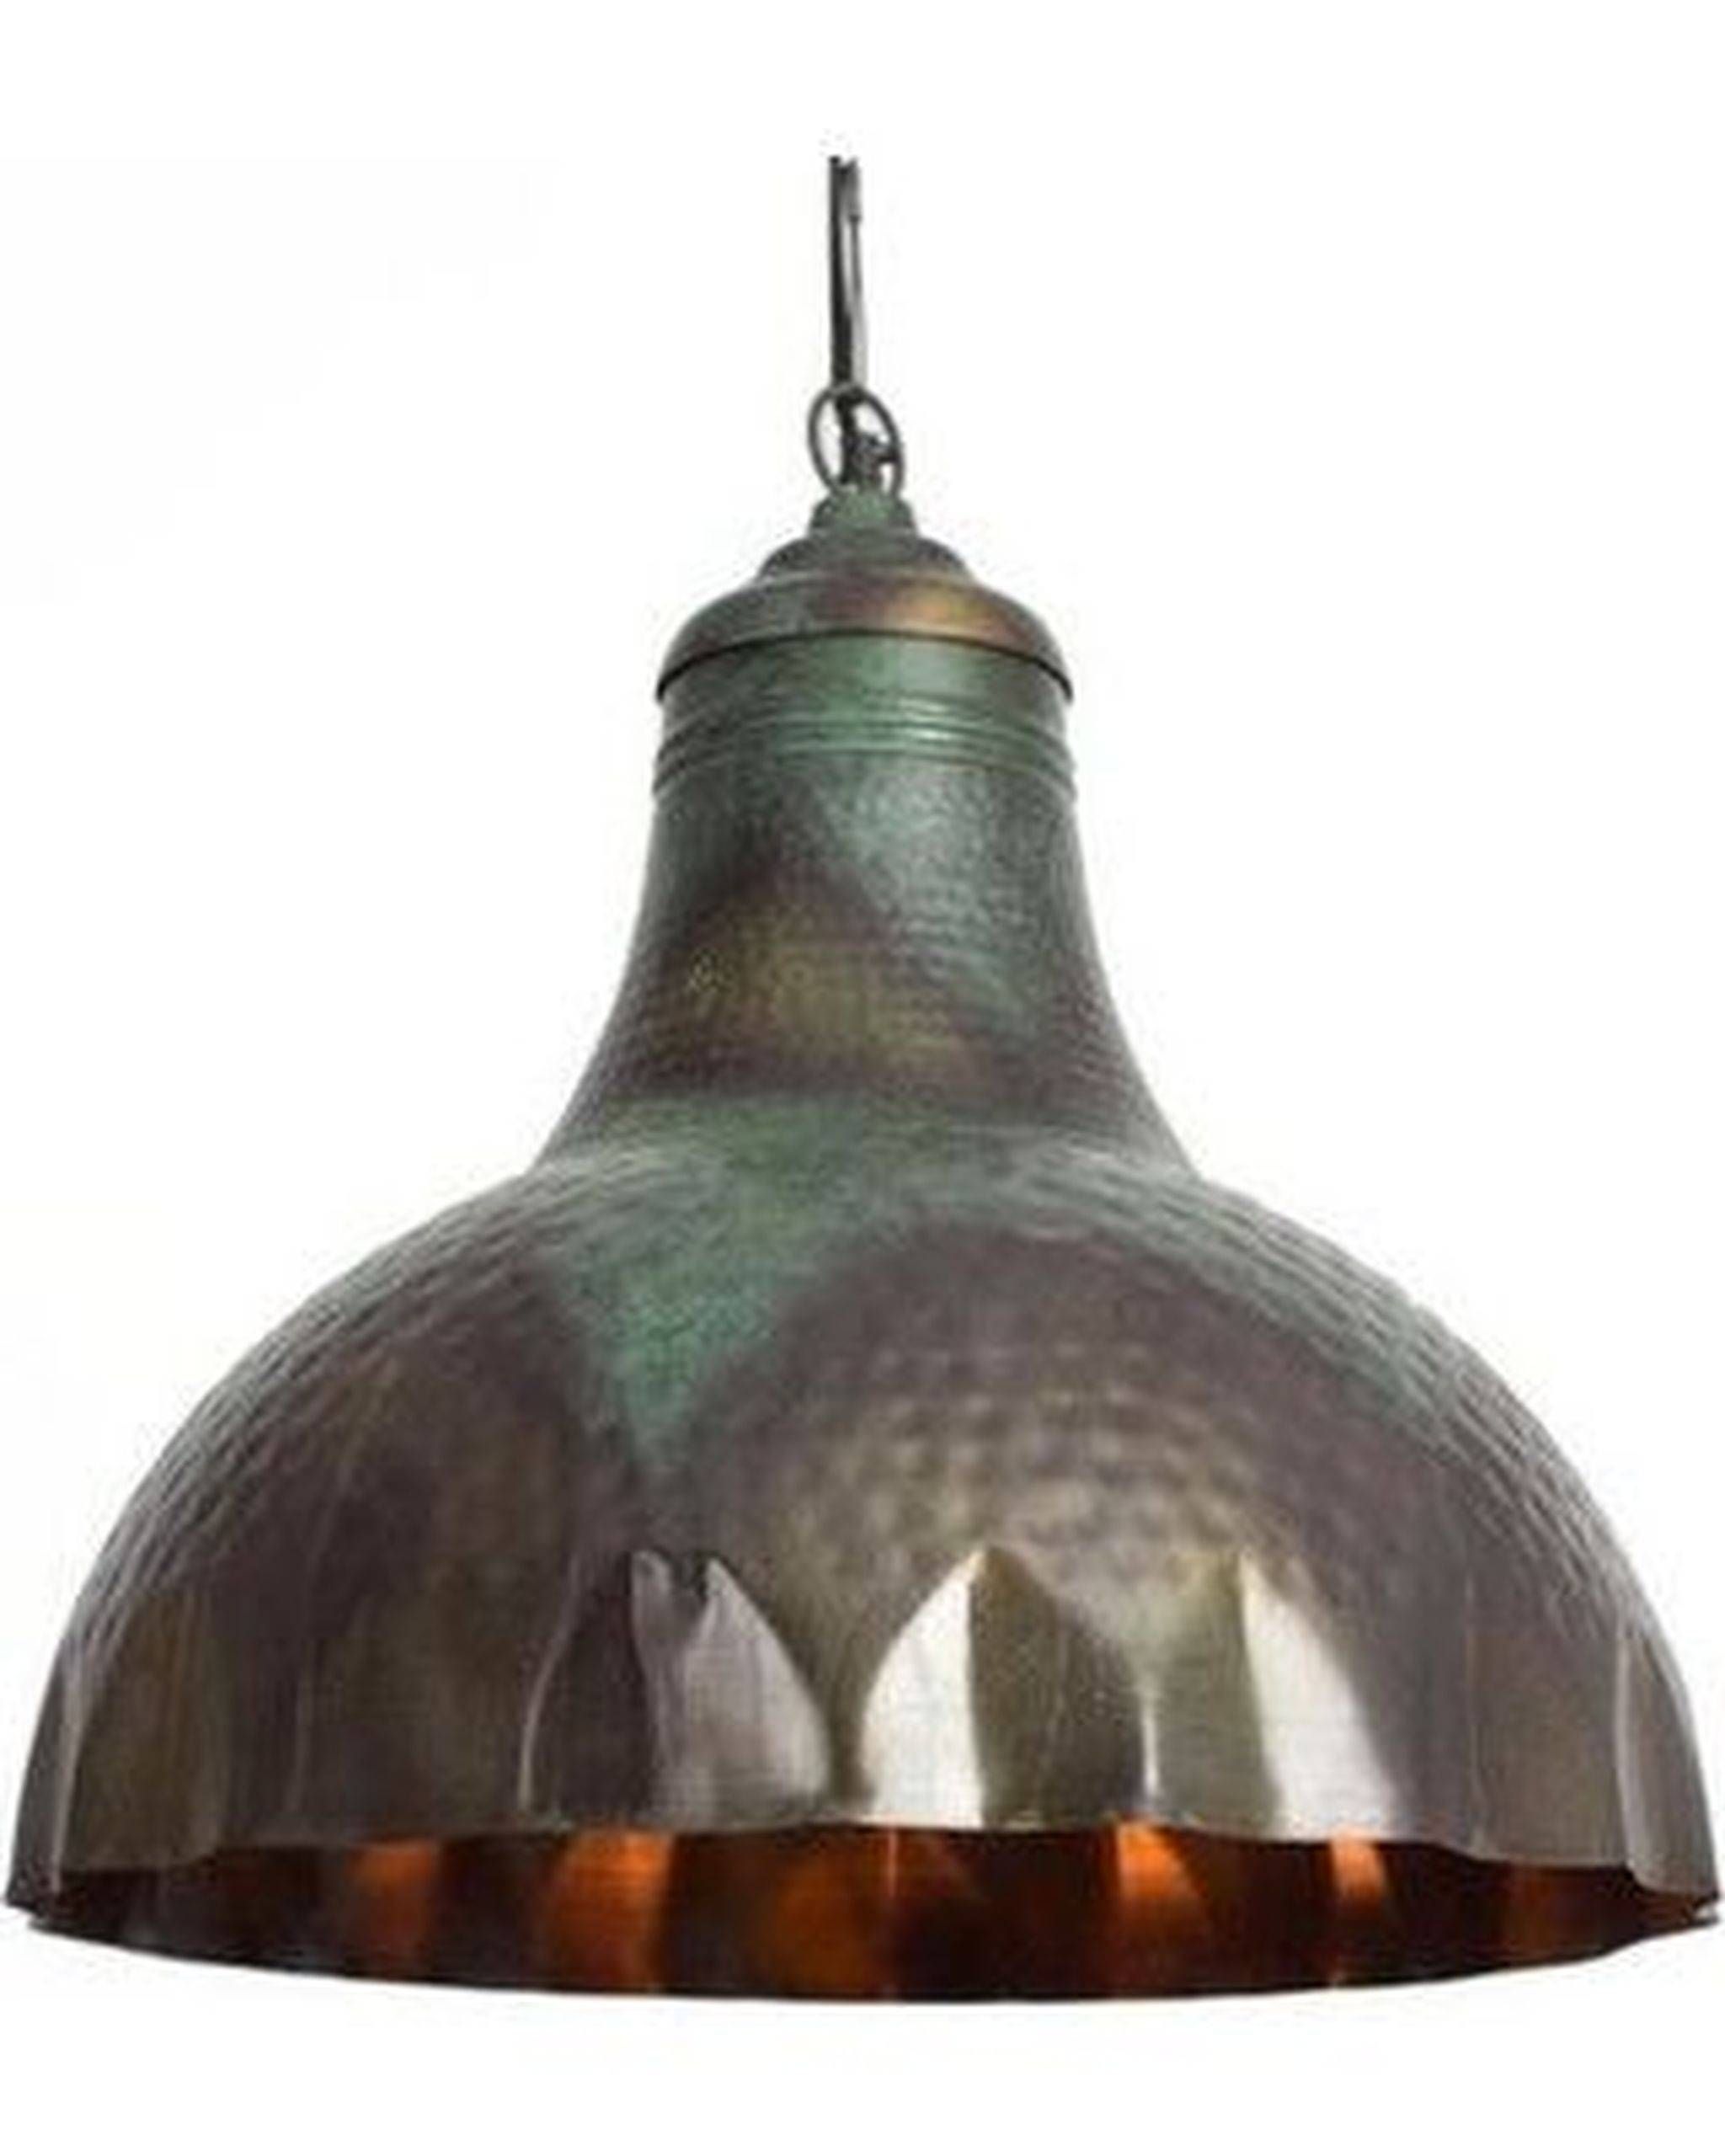 Hammered Metal Hanging Pendant Lamp With Green Patina Throughout Hammered Metal Pendants (View 5 of 15)